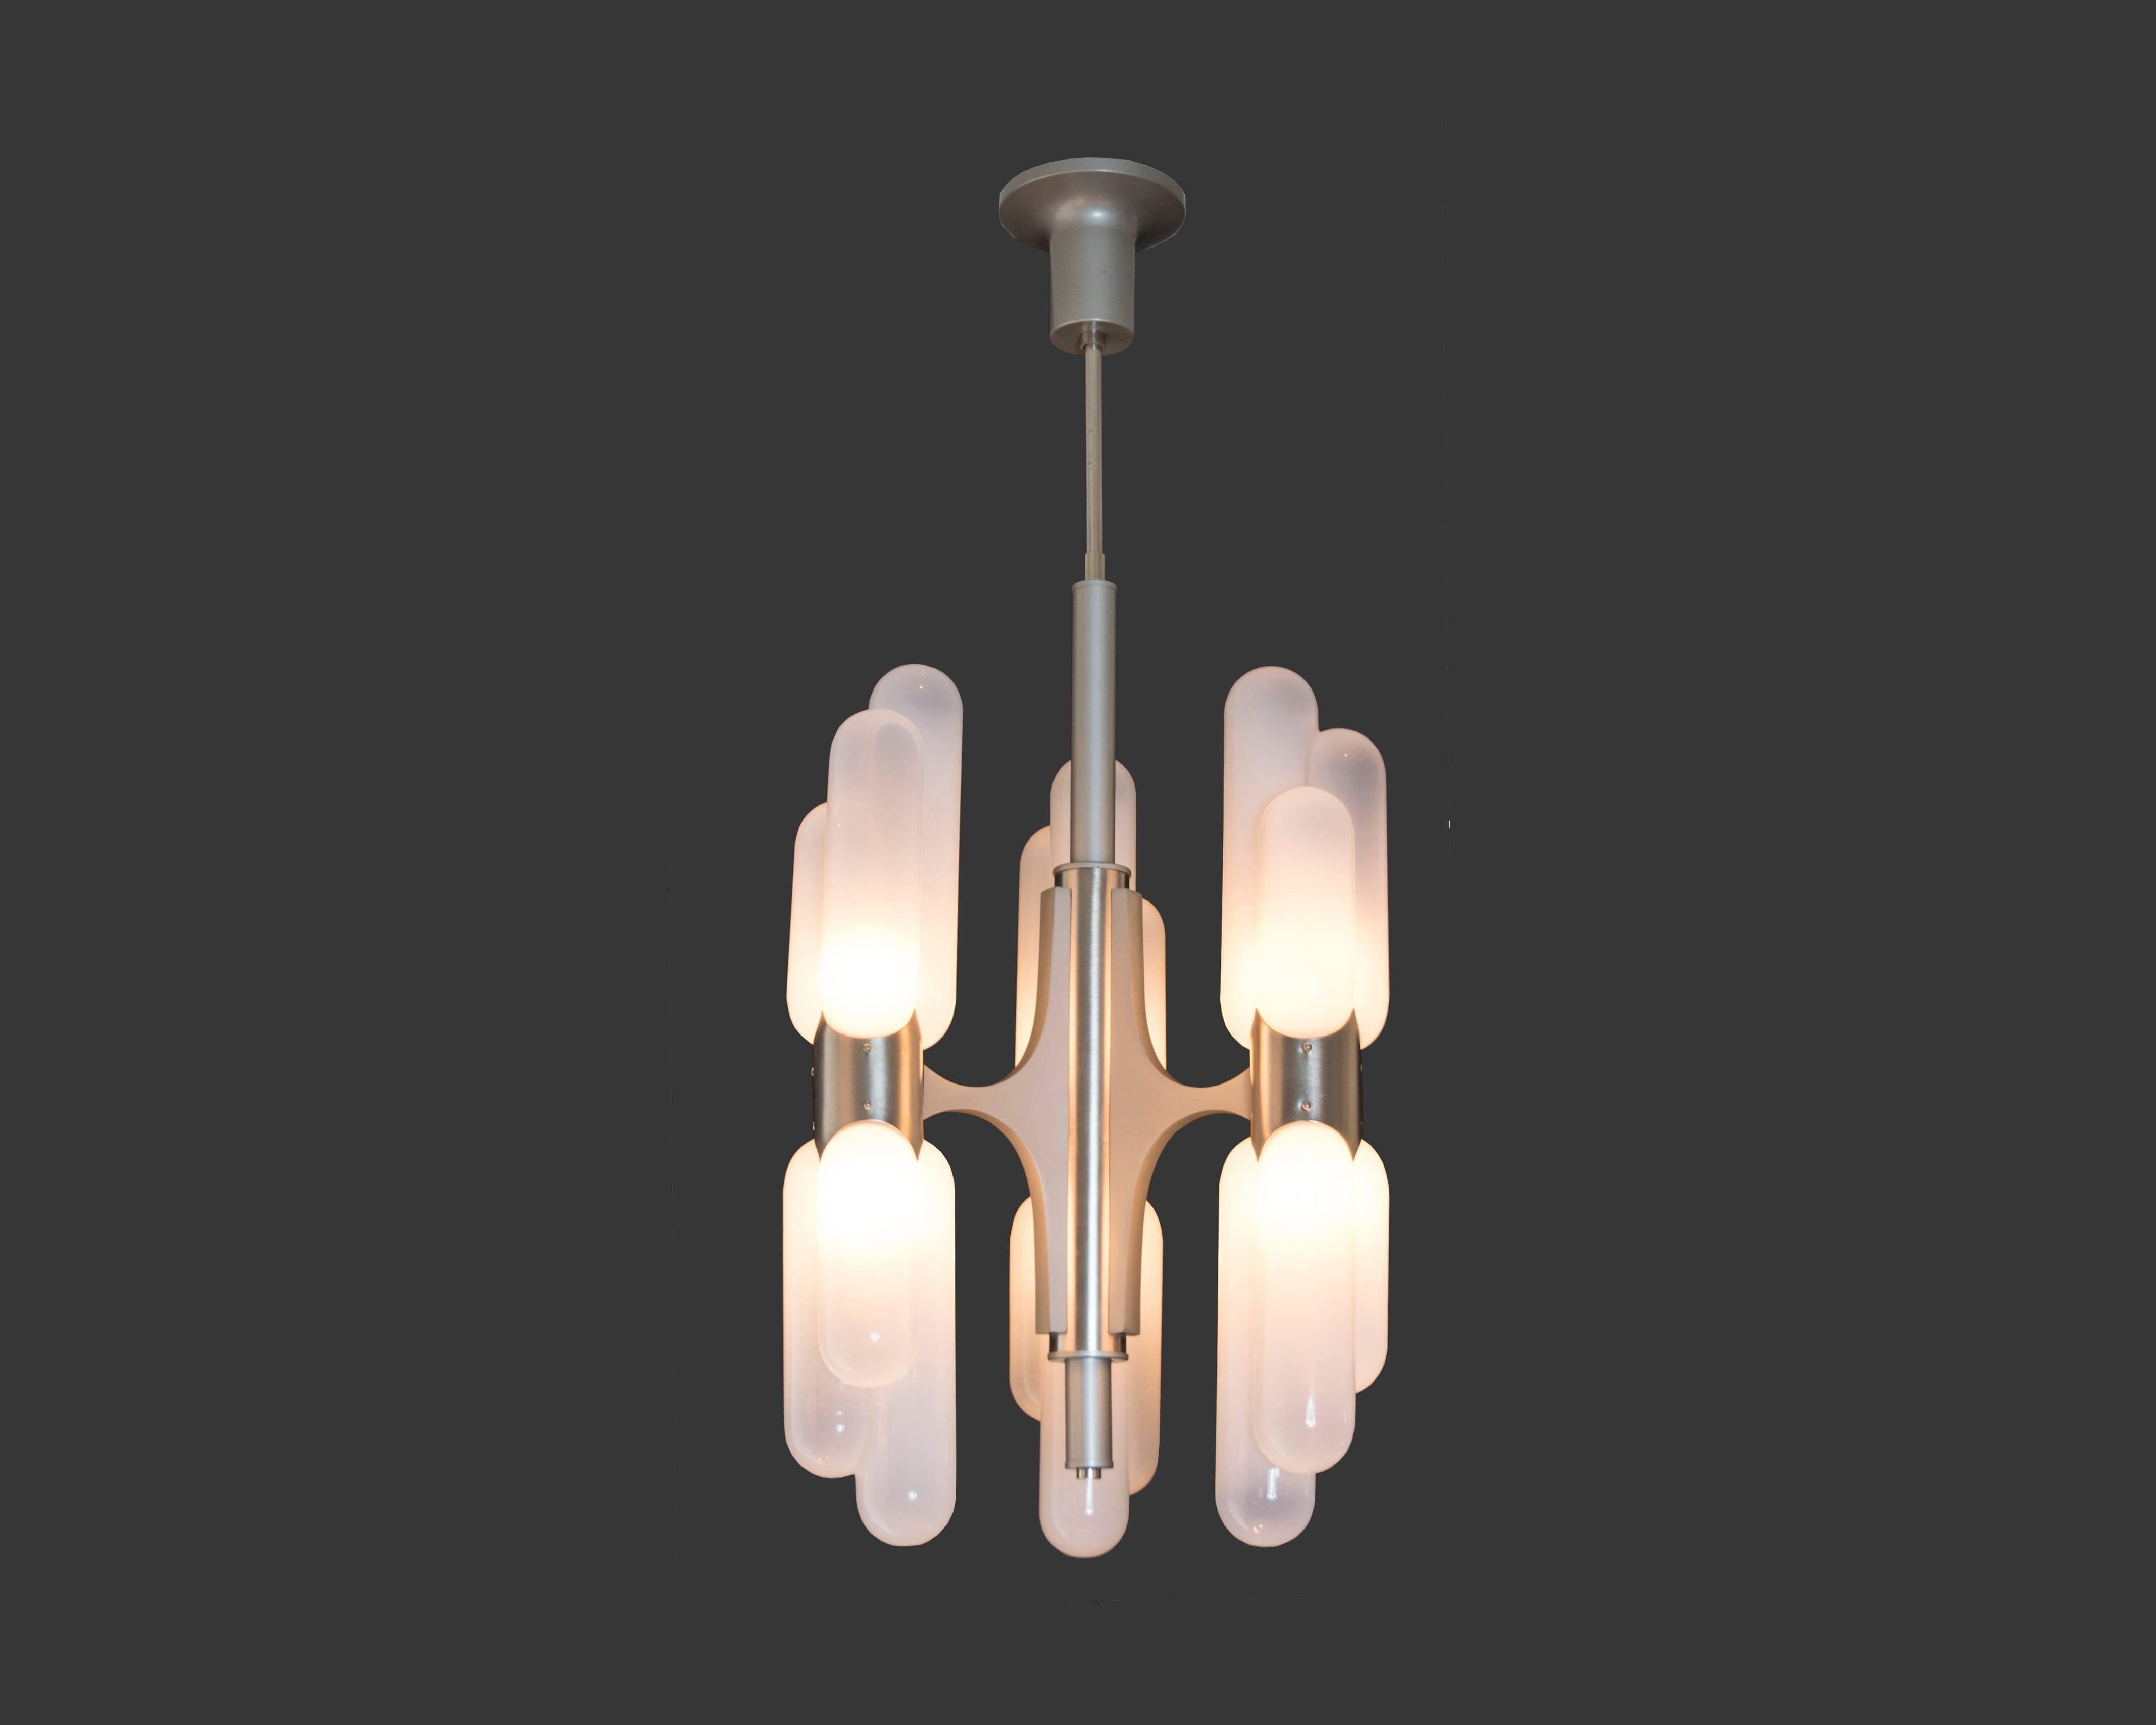 Exquisite handblown Murano glass chandelier by Italian Mid-Century master Carlo Nason for Mazzega lighting. Six torpedo shaped lights up and down; it has recently been rewired to US standards. We have three pairs of sconces and a larger coordinating